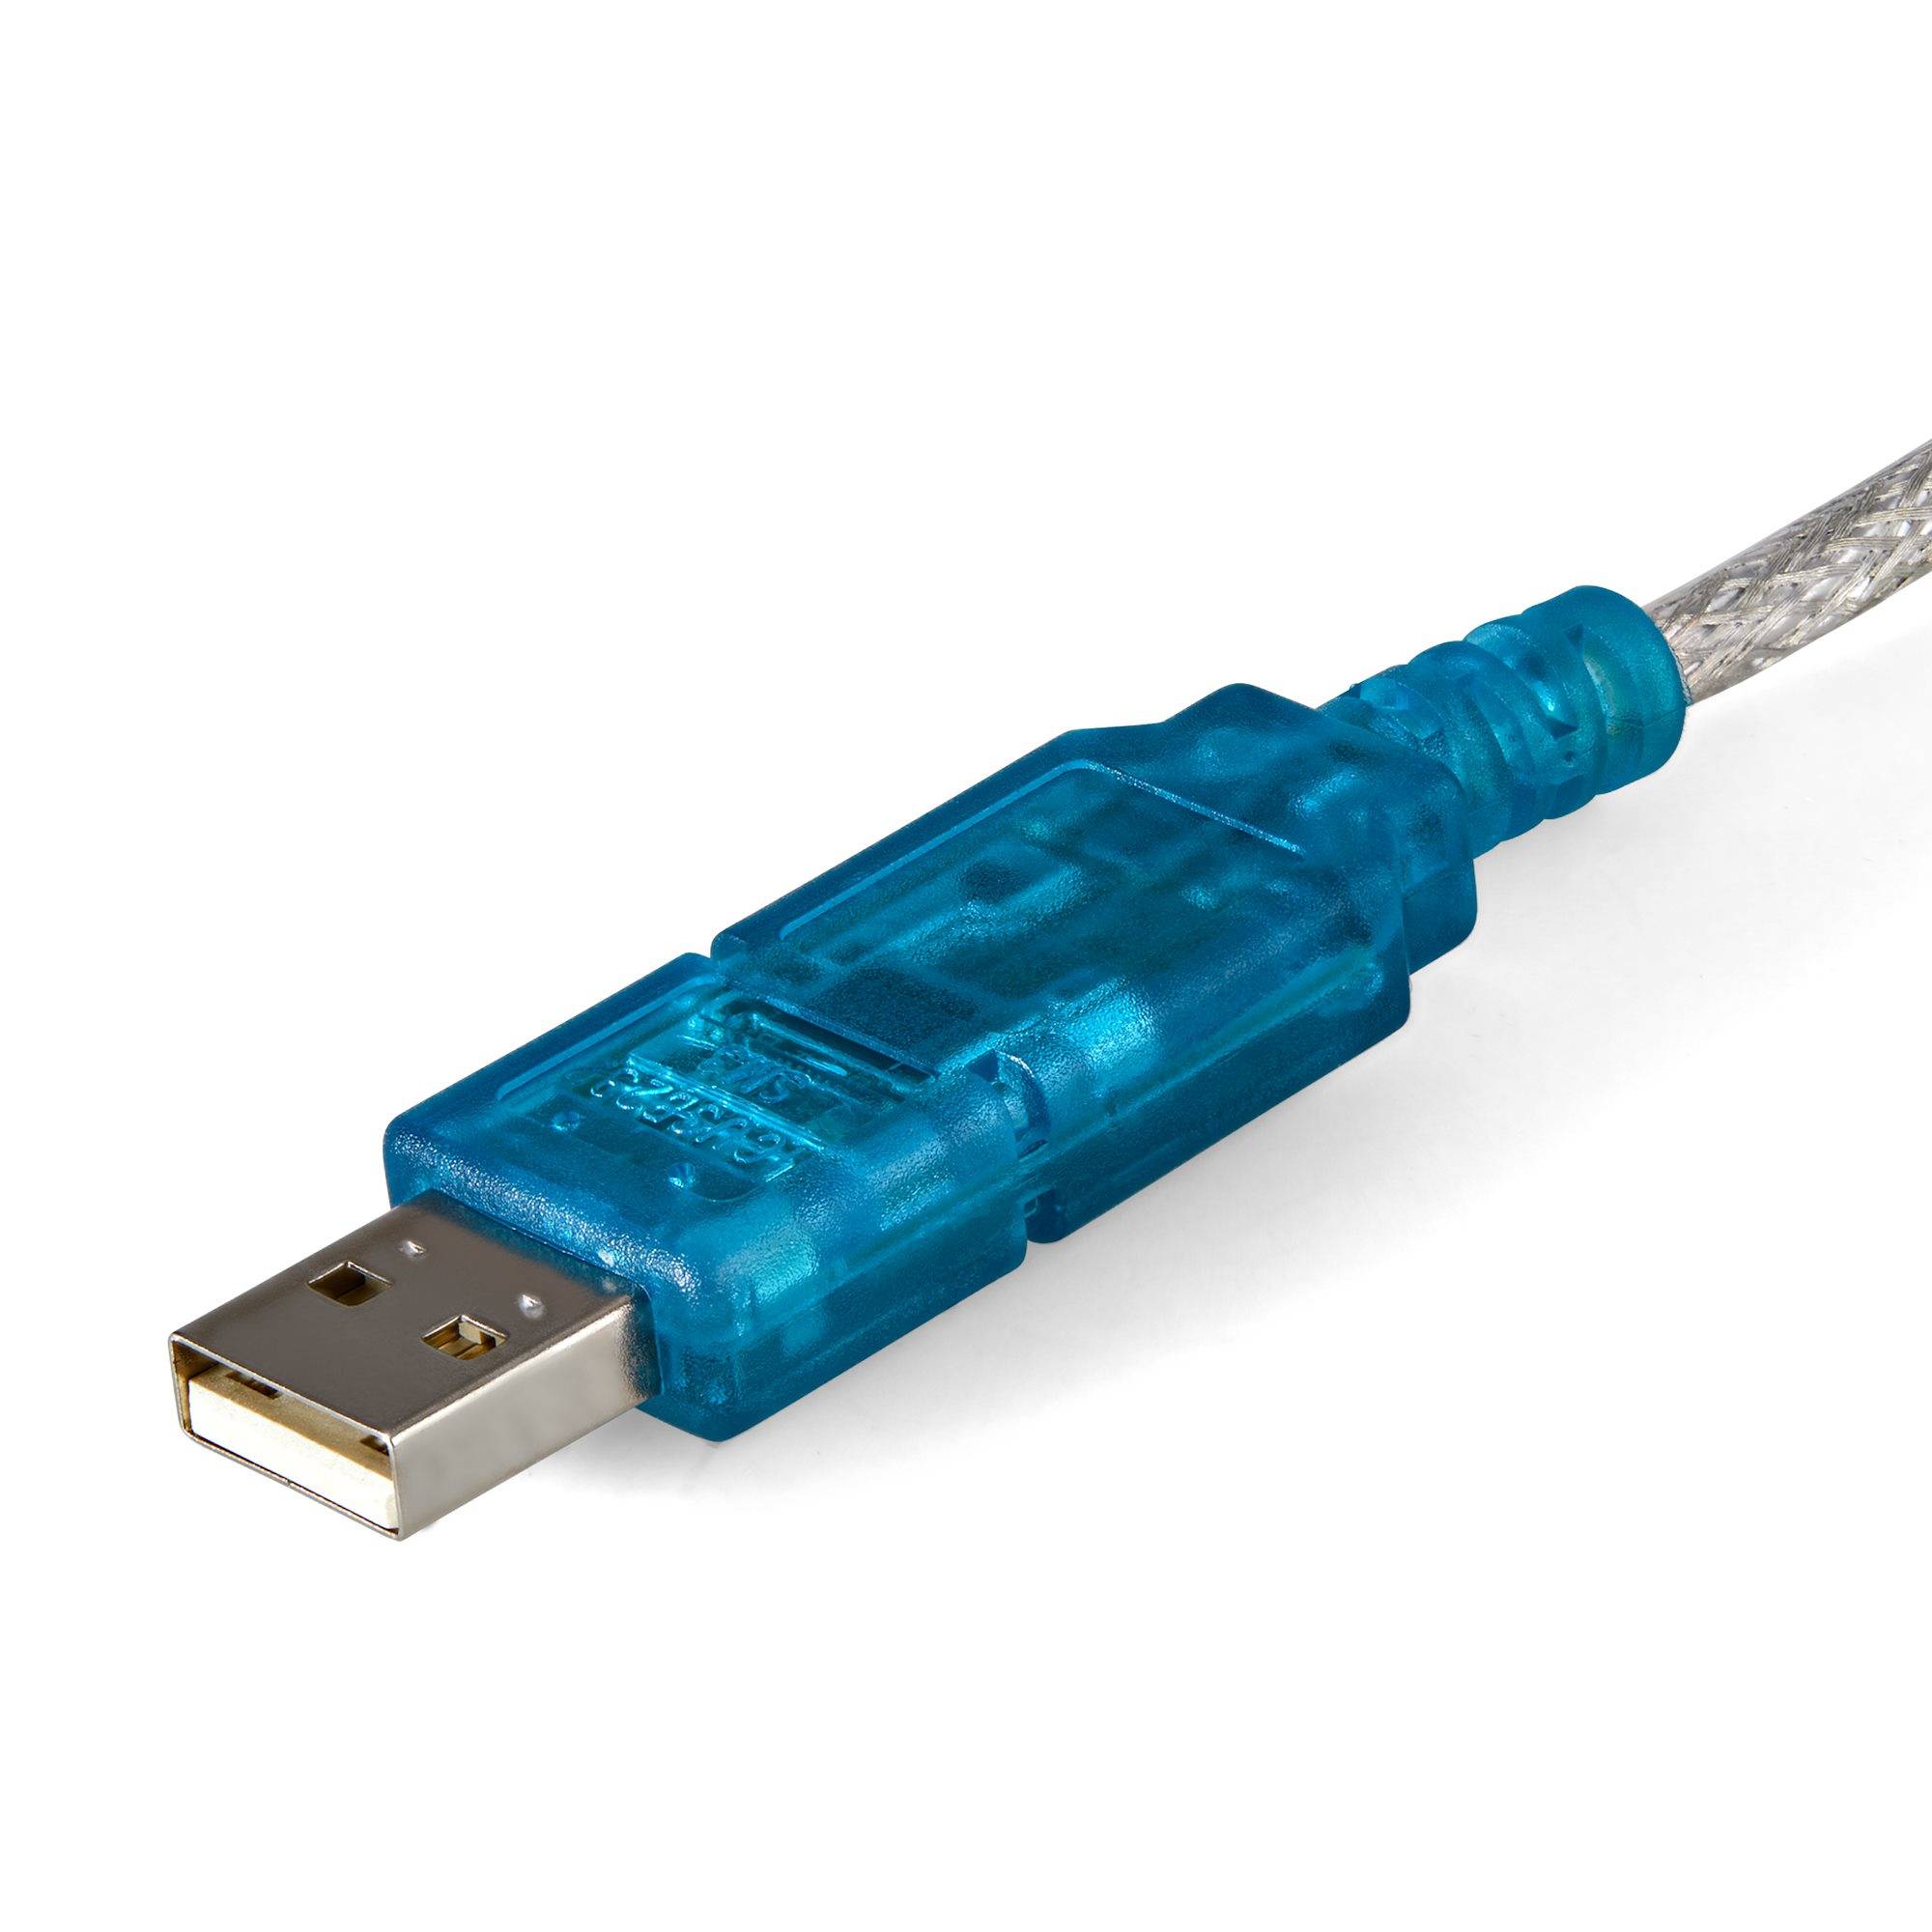 Rca Informatique - image du produit : USB TO SERIAL ADAPTER CABLE USB TO RS232 DB9 M/M